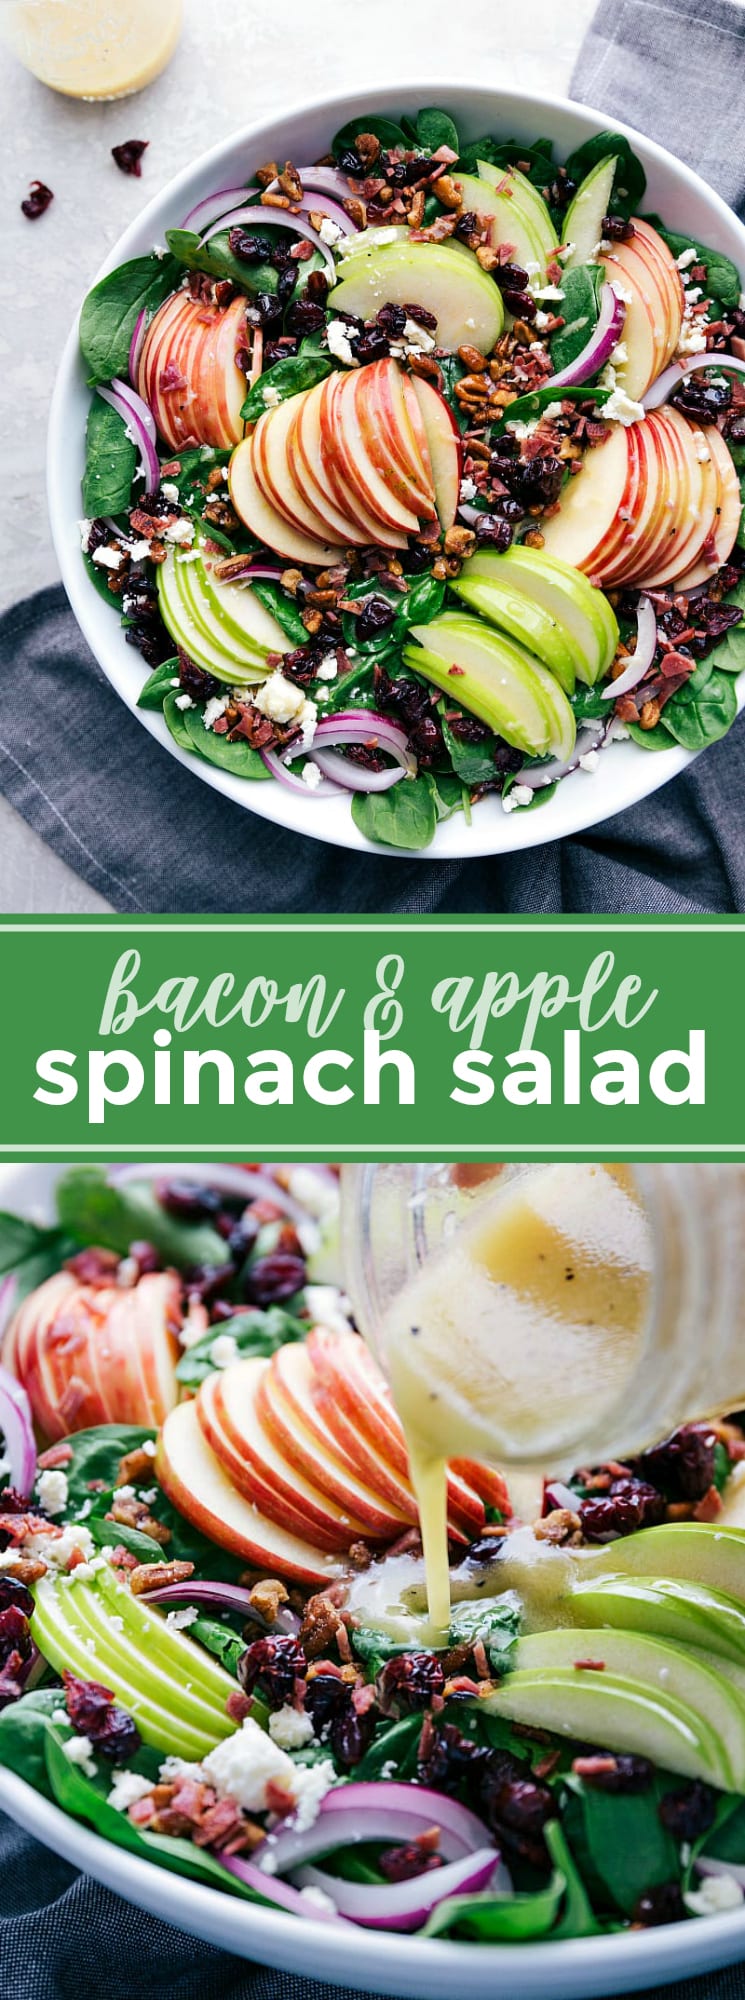 The perfect Fall Spinach Salad with spinach, apples, red onion, dried cranberries, feta cheese, the best turkey bacon, candied pecans and an incredible apple dijon vinaigrette via chelseasmessyapron.com #spinach #salad #easy #quick #kidfriendly #fall #holiday #holidays #recipe #thanksgiving #christmas